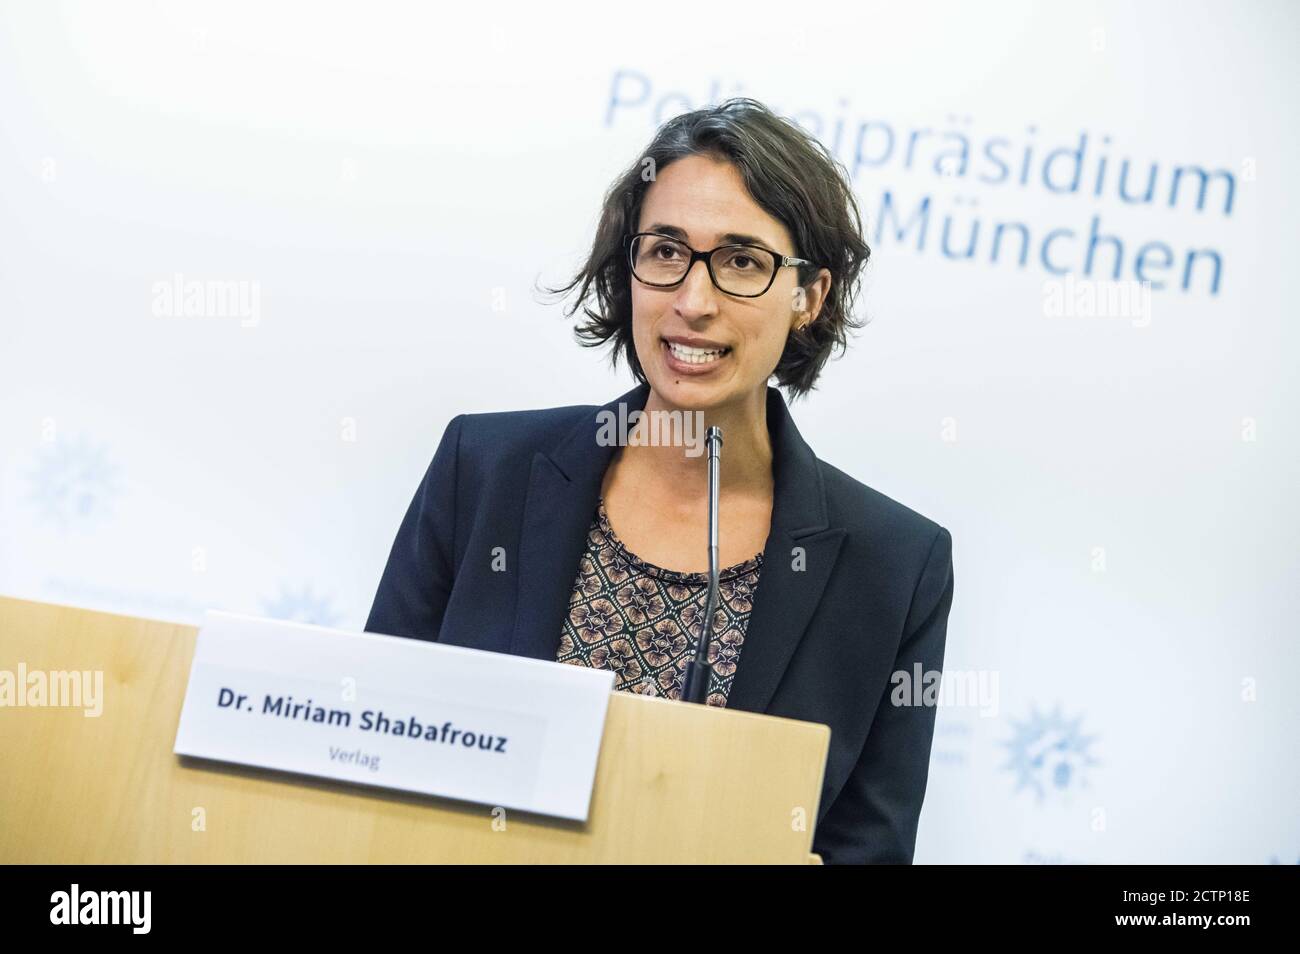 Munich, Bavaria, Germany. 24th Sep, 2020. Dr. MIRIAM SHABAFROUZ of the Bundeszentrale politischer Bildung. Bavarian Interior Minister Joachim Herrmann introduced the new bookÂ ''Islamischer Staat: Geschlagen, nicht besiegt'' (''Islamic State: Beaten, but Not Defeated'') by Dr. Daniel Holz andÂ terrorism expert Rolf Tophoven at the PolizeipraesidiumÂ Munich.Â The trio engaged in aÂ discussion of the Islamic State (IS, ISIS) in an overview, how IS' methodology has changed over the years, and how its terrorist network attempts to spread its influence in the modern era. (Credit Image: © Sac Stock Photo